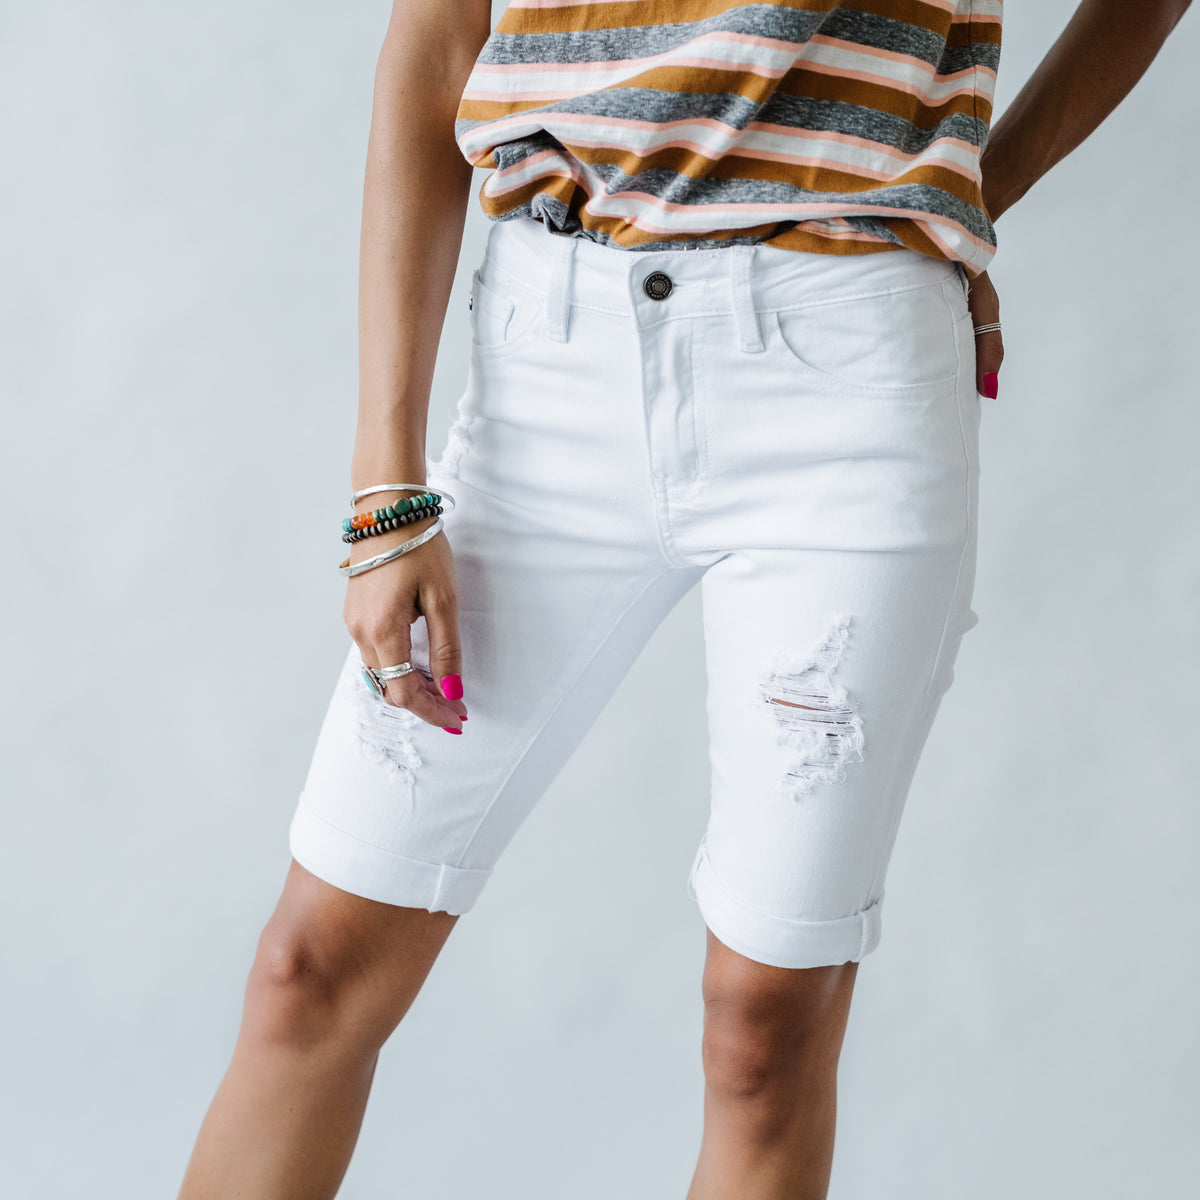 Not Alone Distressed HASHTAG White DNA Shorts Bermuda – Kancan in